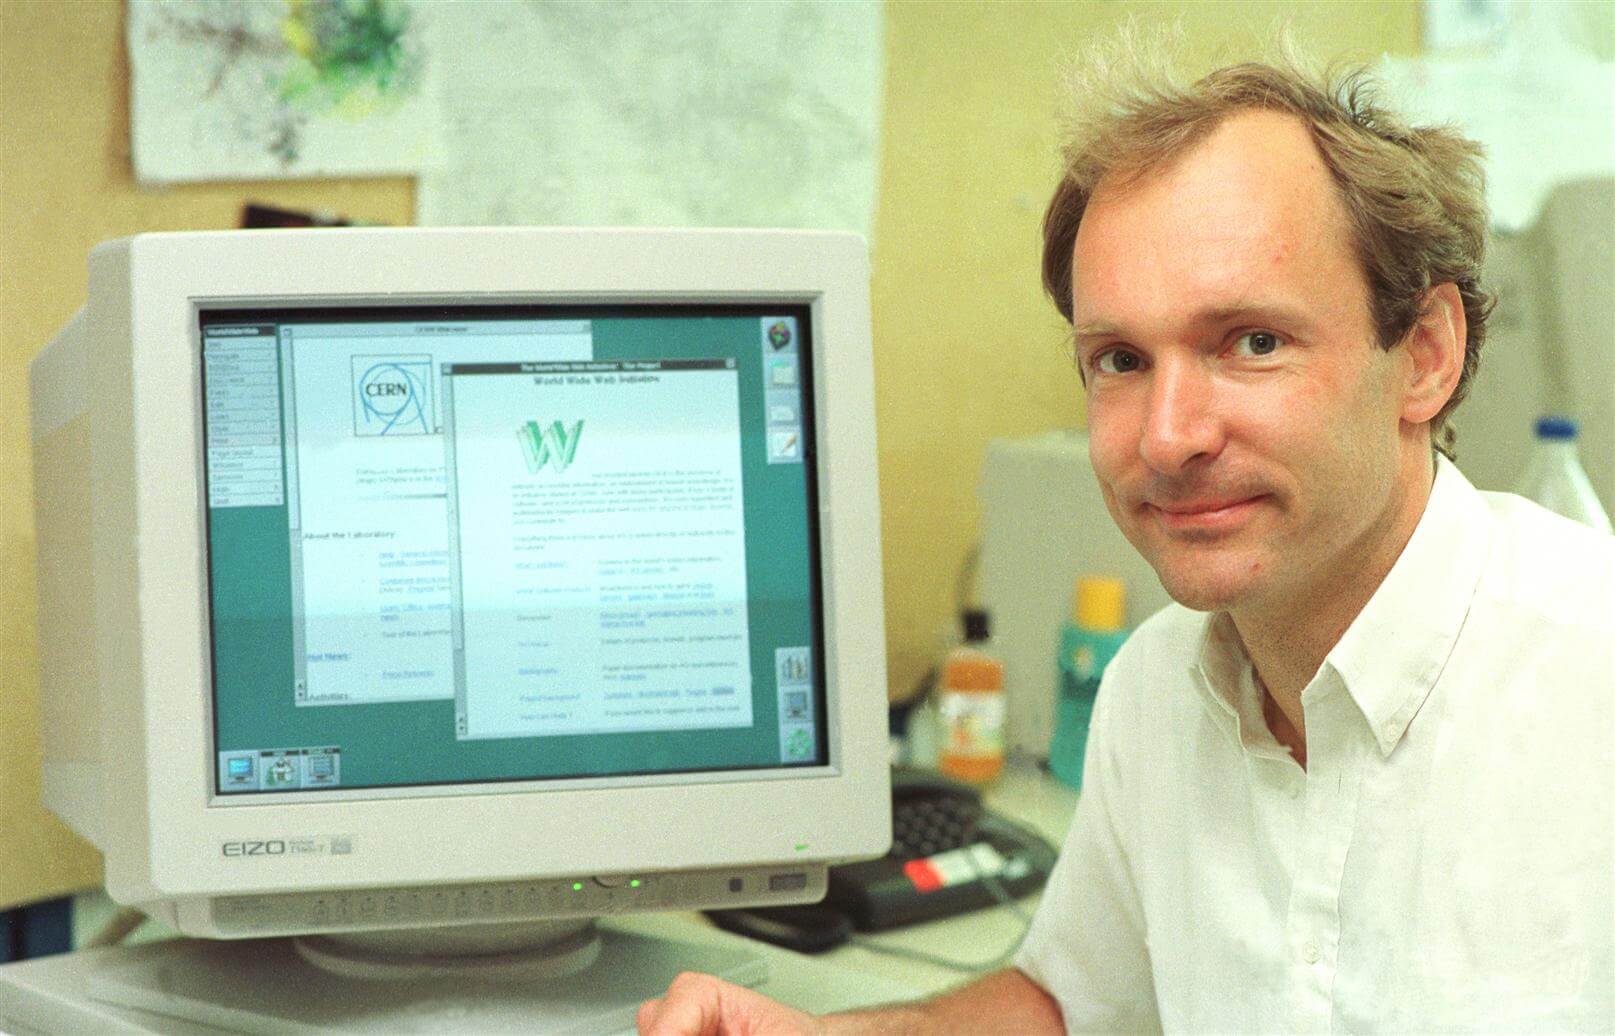 Inventing the world wide web earned Tim Berners with the knight’s title of “Sir,” adding him rightfully to the